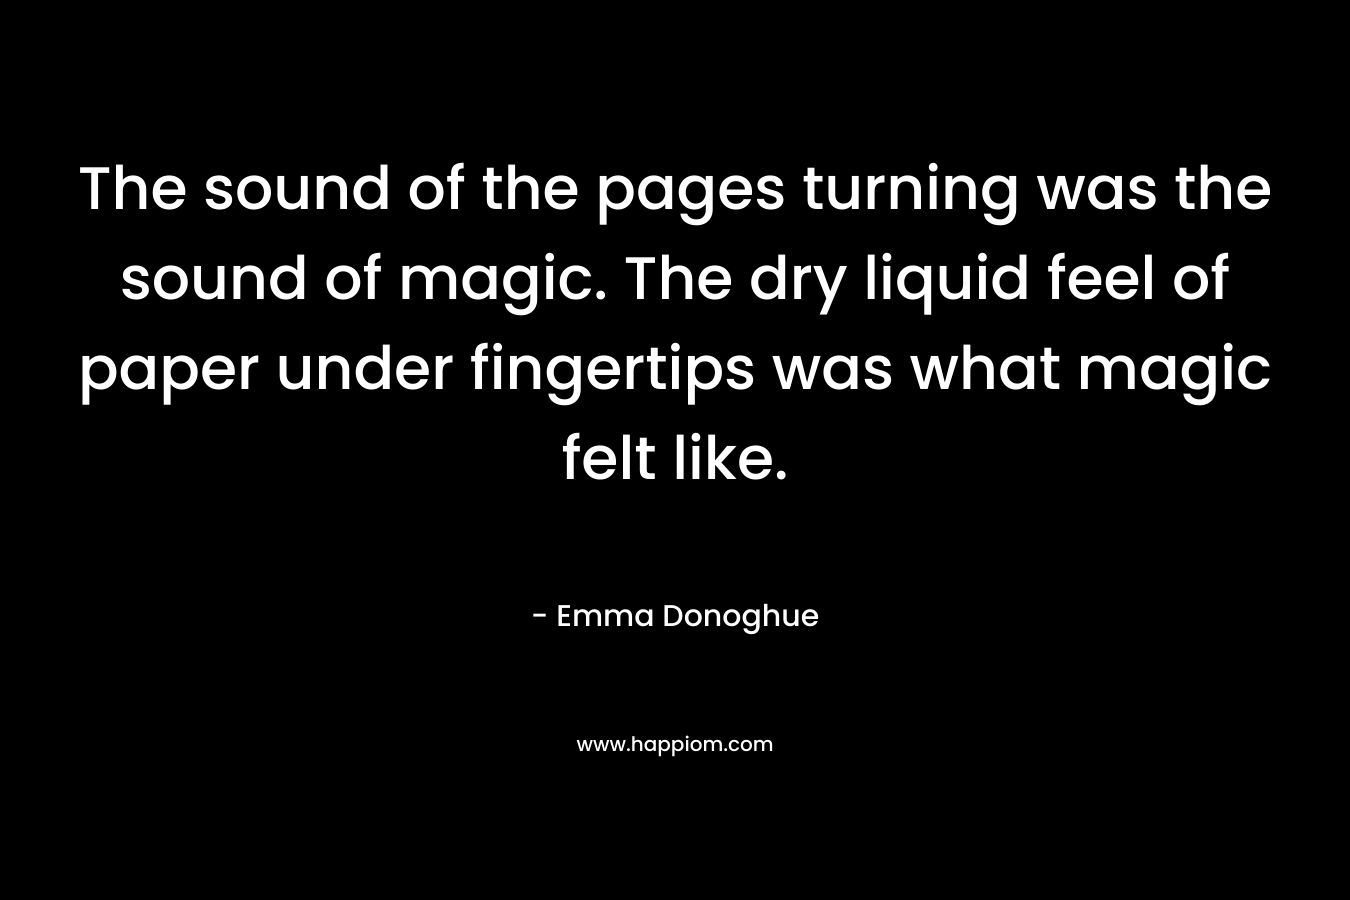 The sound of the pages turning was the sound of magic. The dry liquid feel of paper under fingertips was what magic felt like. – Emma Donoghue